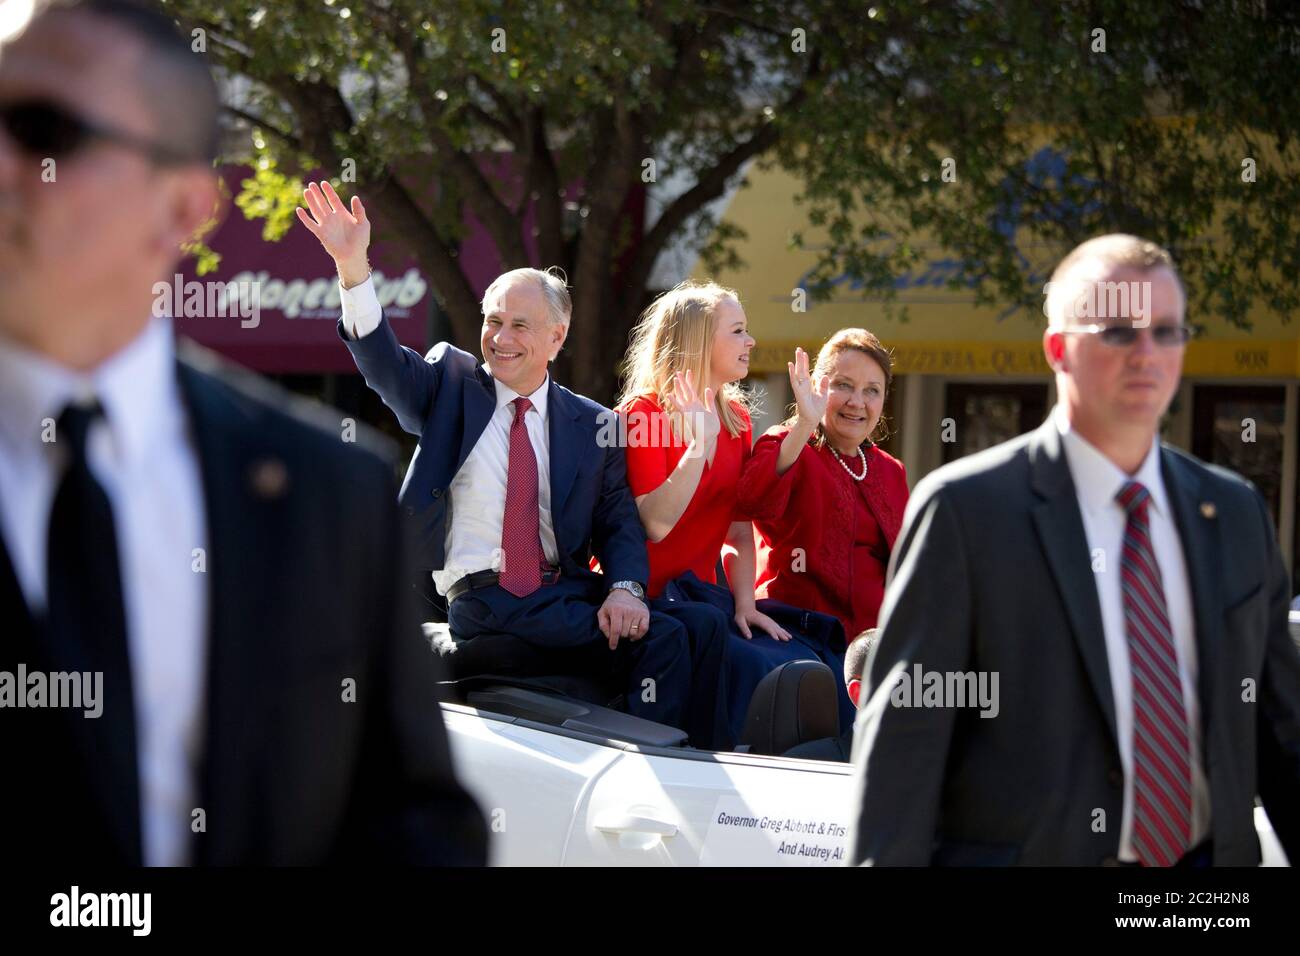 Austin Texas USA, January 20 2015: Texas Gov. Greg Abbott, his daughter, Audrey, and his wife, Cecelia, wave to the crowd as they ride in a convertible car during parade after Abbott's swearing-in ceremony at the Texas Capitol. Abbott becomes the 48th Governor of Texas, succeeding Rick Perry, the longest serving Texas Governor at 14 years.  ©Bob Daemmrich Stock Photo